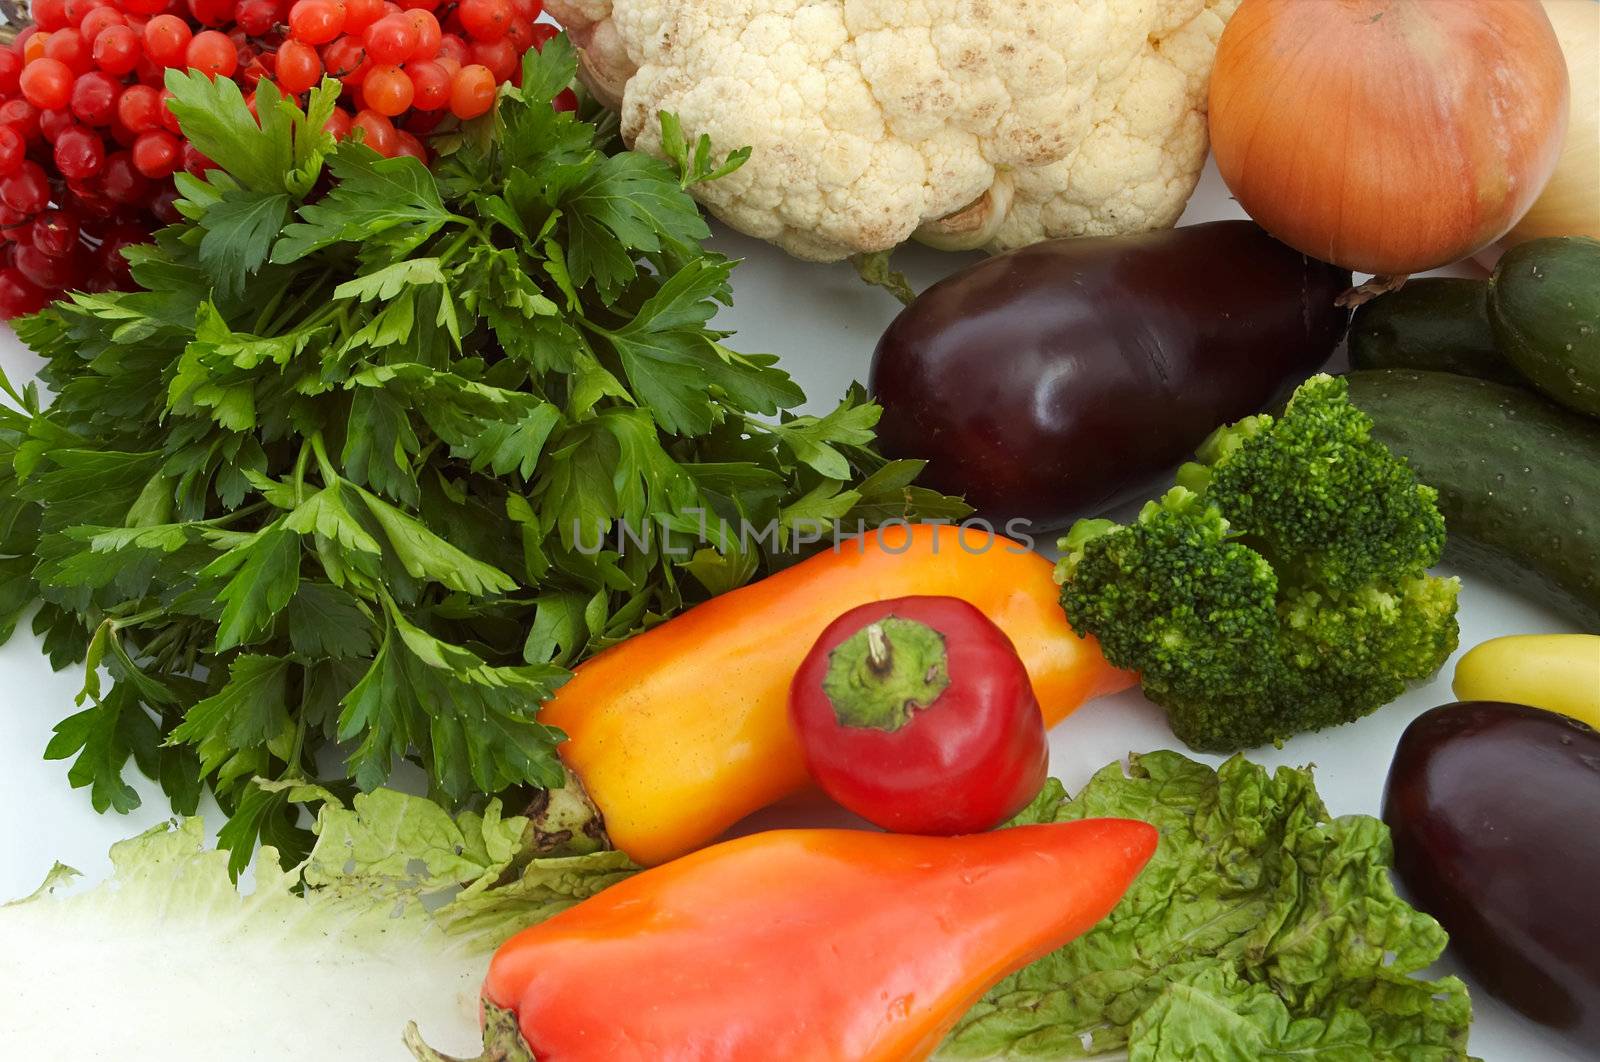 An image of various vegetables